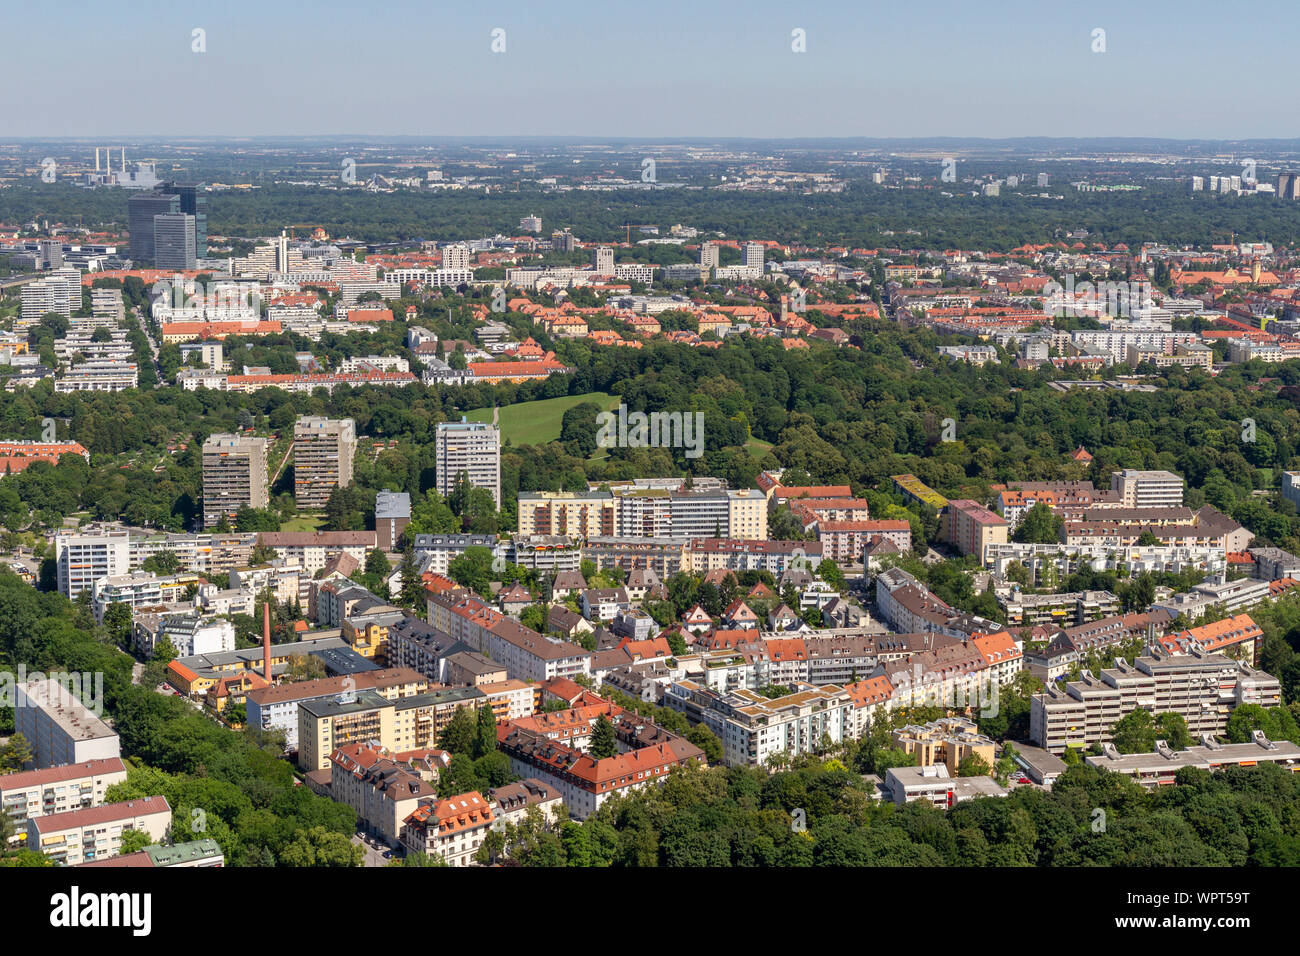 General view across of housing and parks east of the Olympiaturm (Olympic Tower), Munich, Bavaria, Germany. Stock Photo